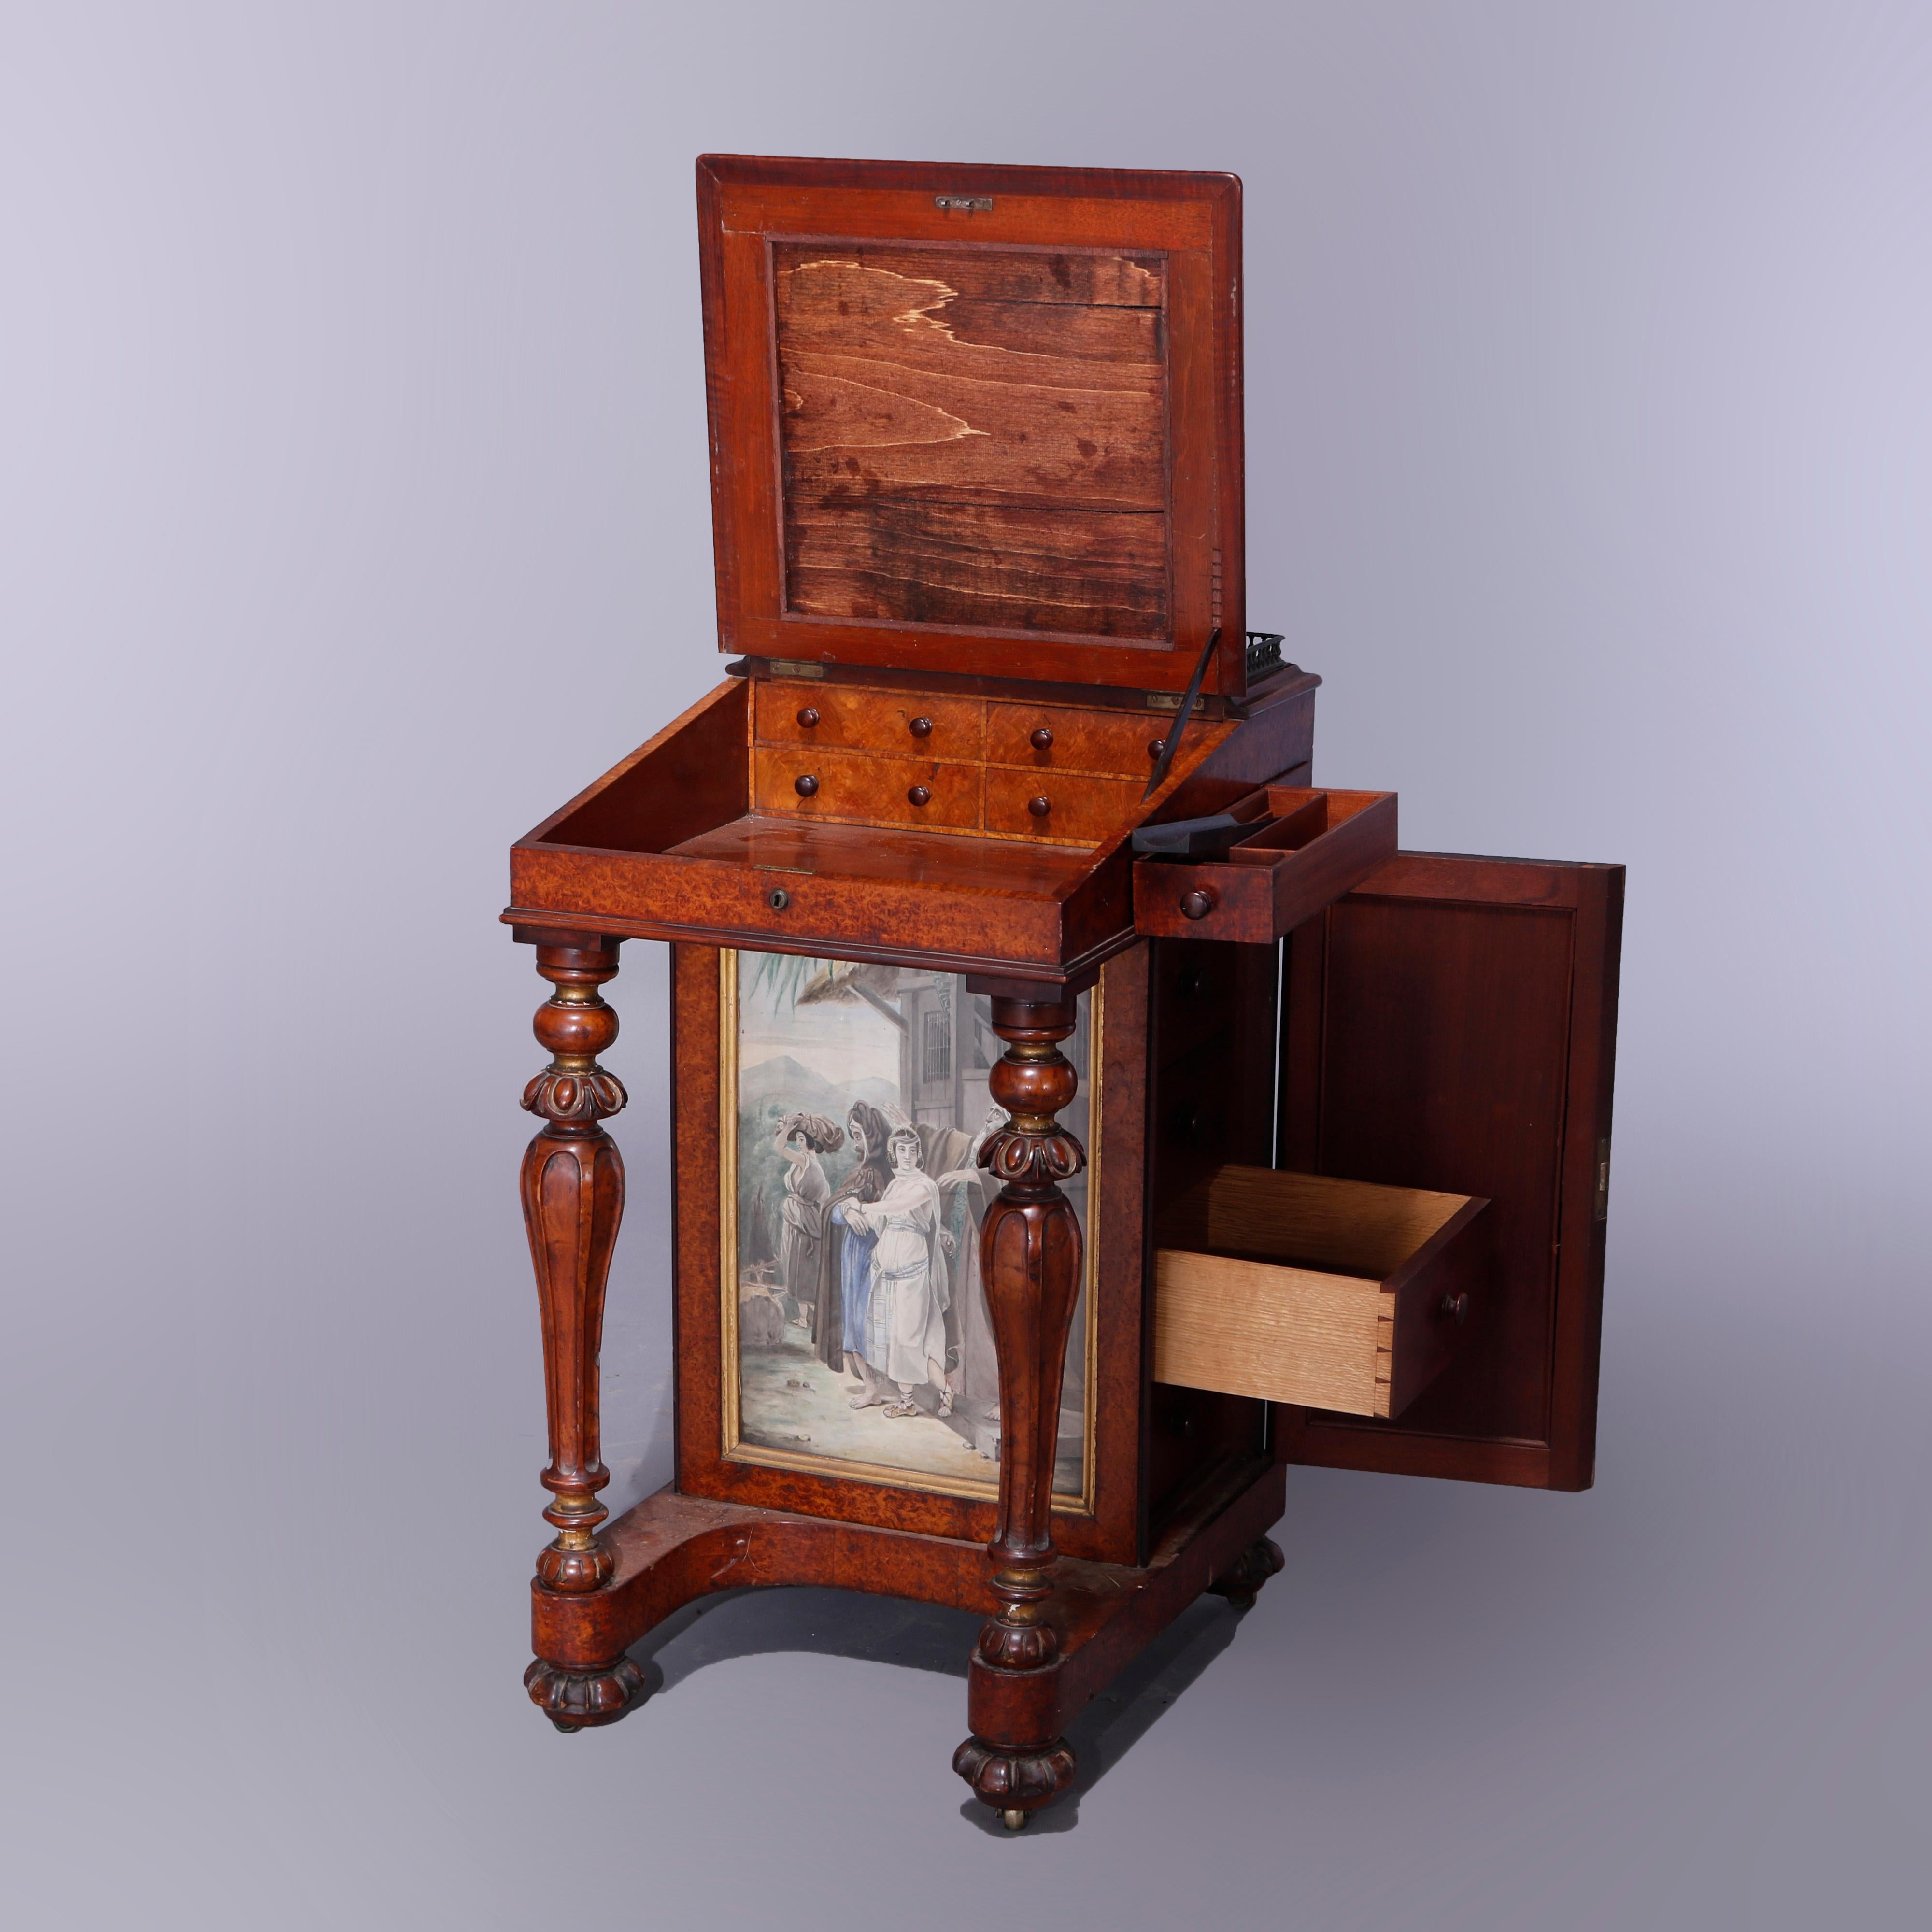 An antique diminutive davenport desk offers burl and mahogany construction with upper pierced bronze gallery over slant front desk having watercolor Persian genre scenes (including woman at the well), gilt trim, drawers, and carved balustrade